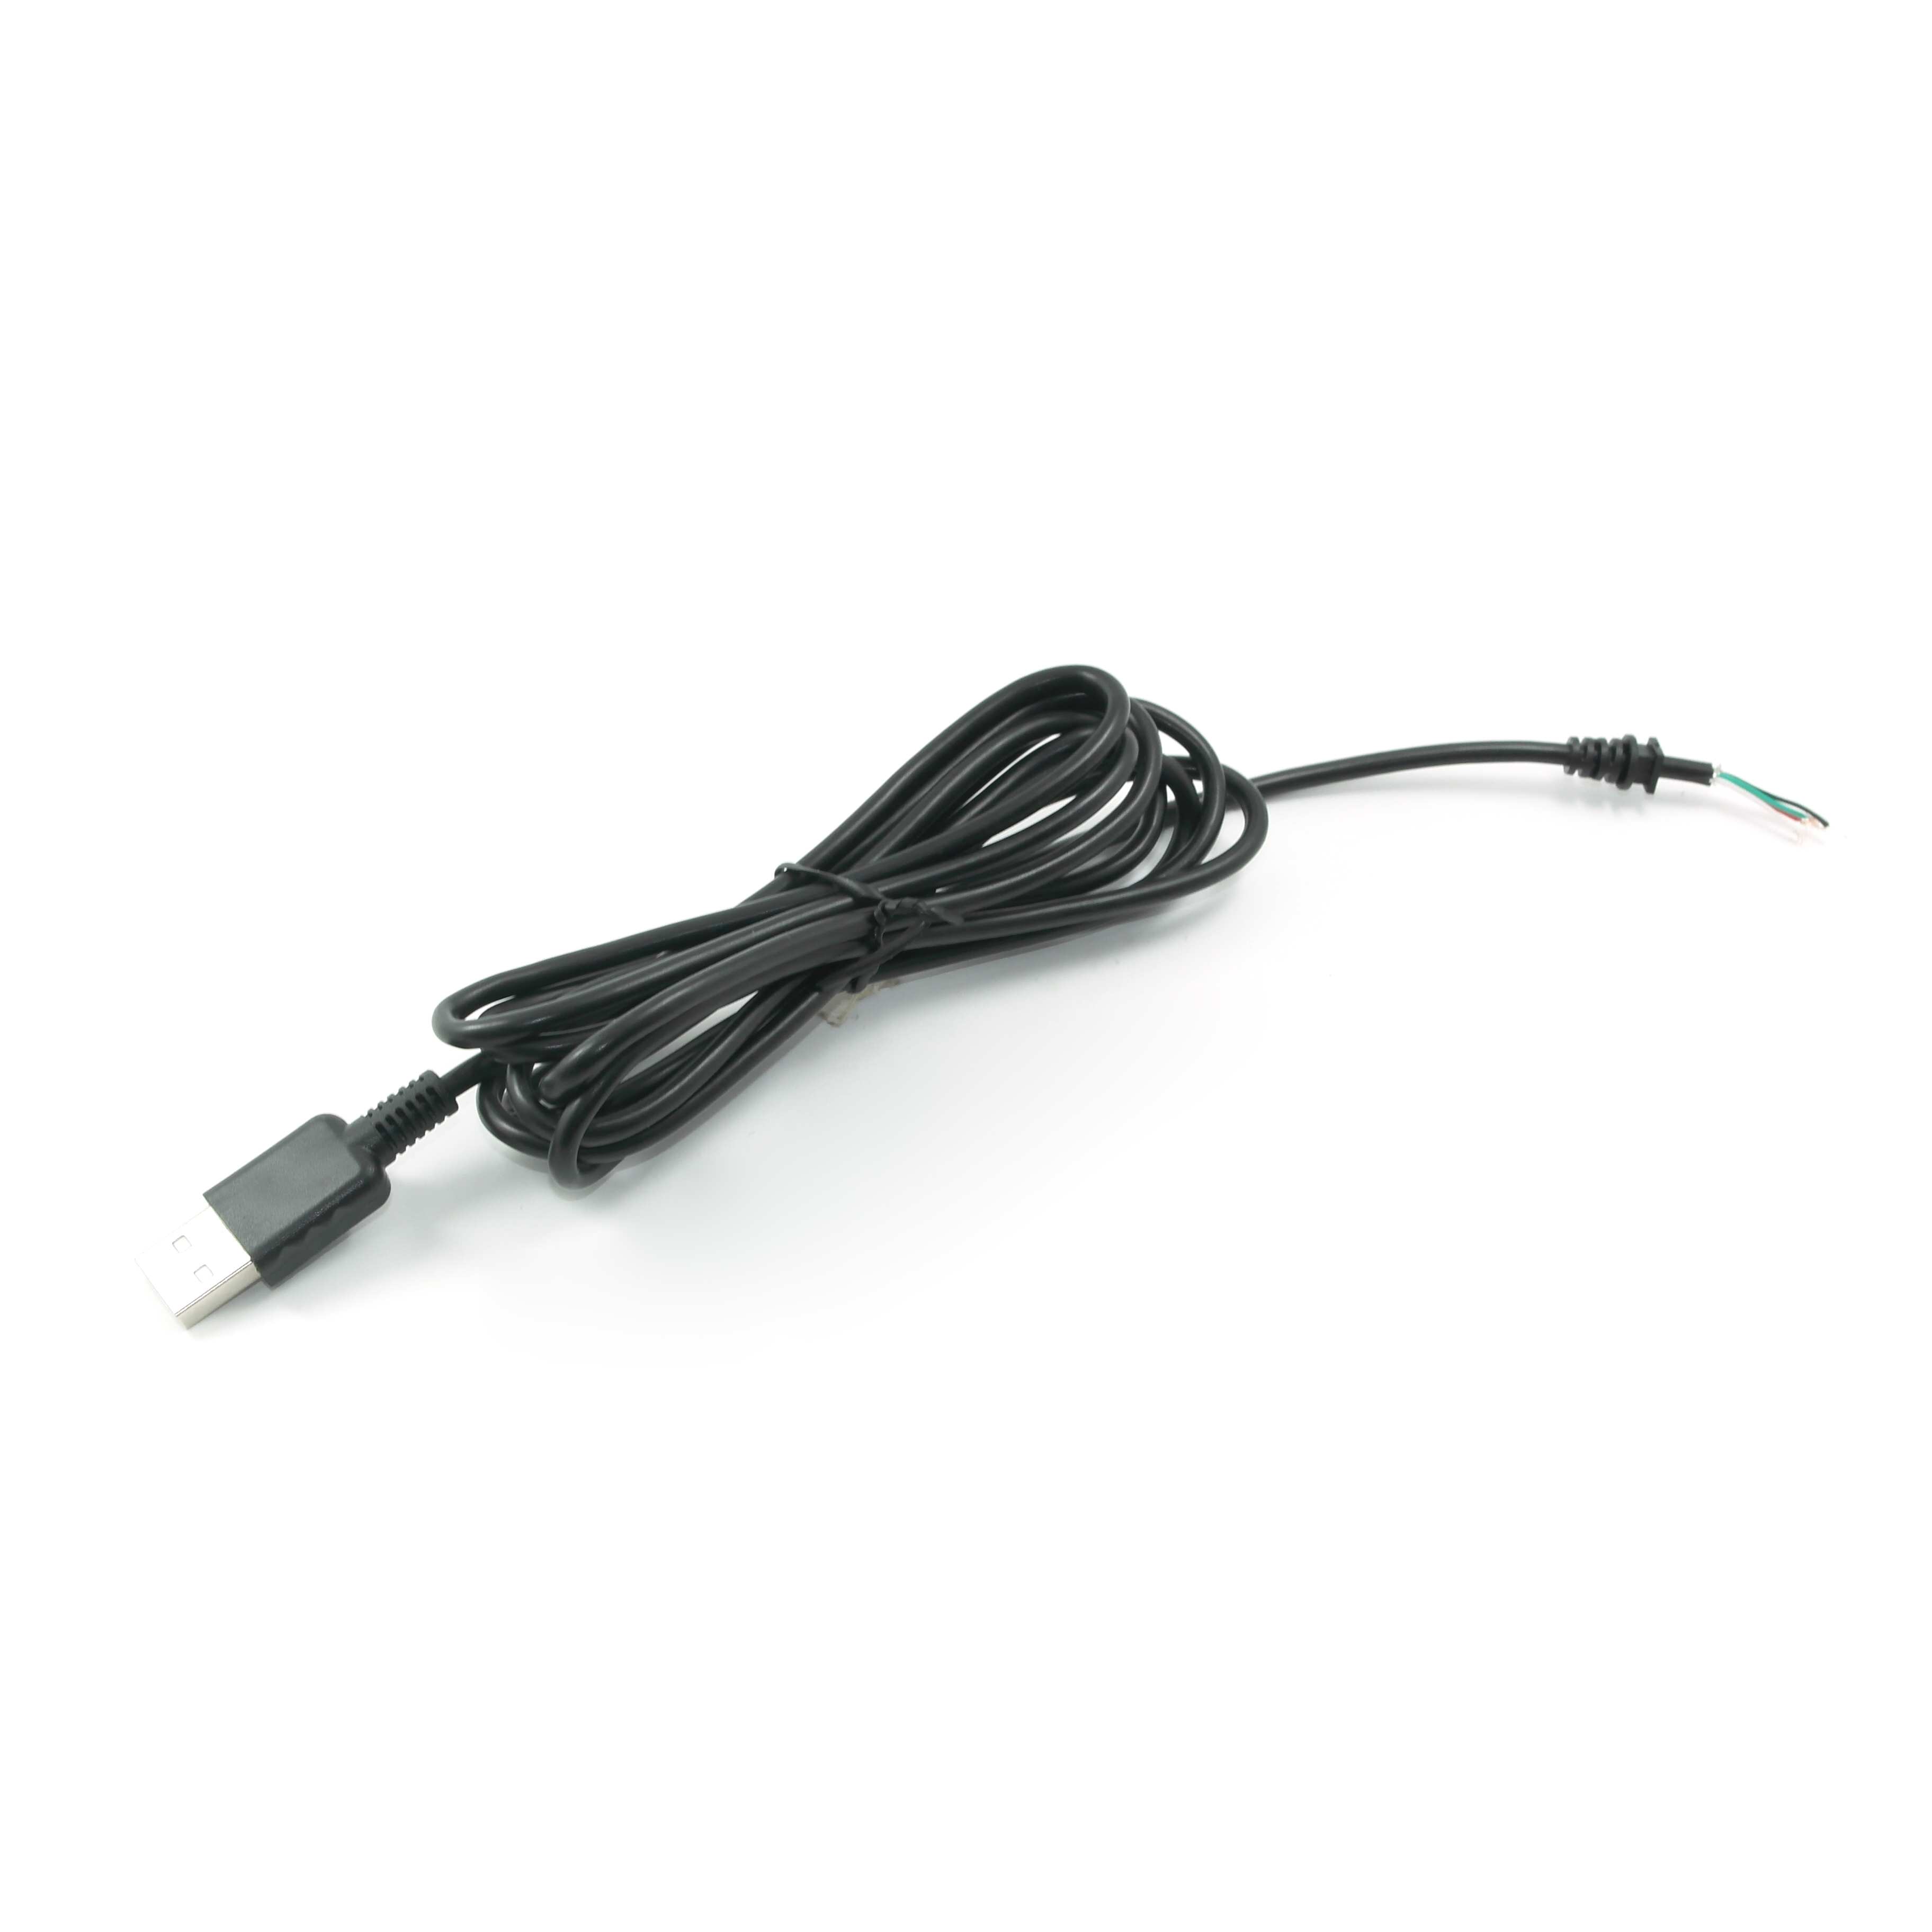 KREUSB2LEADS,USB to Ends(4C) Cable